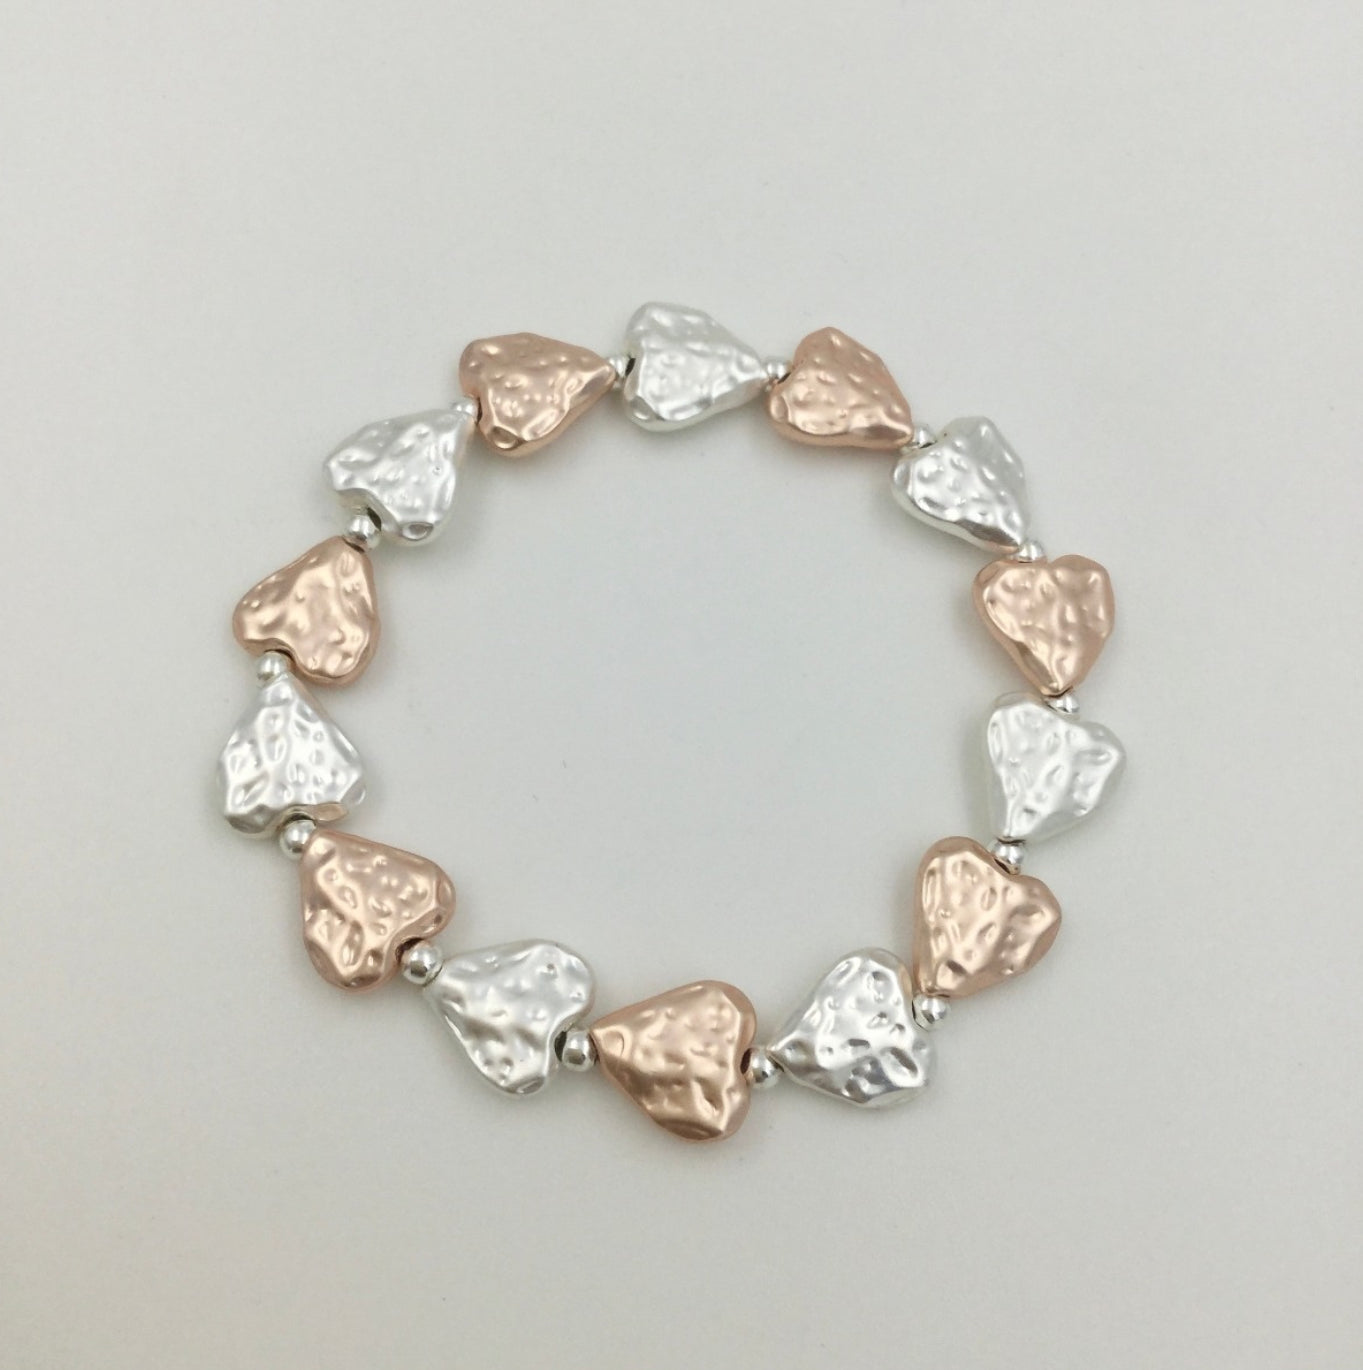 Gracee Jewellery Hammered Hearts Mixed Metals Bracelet - Silver/Rose Gold